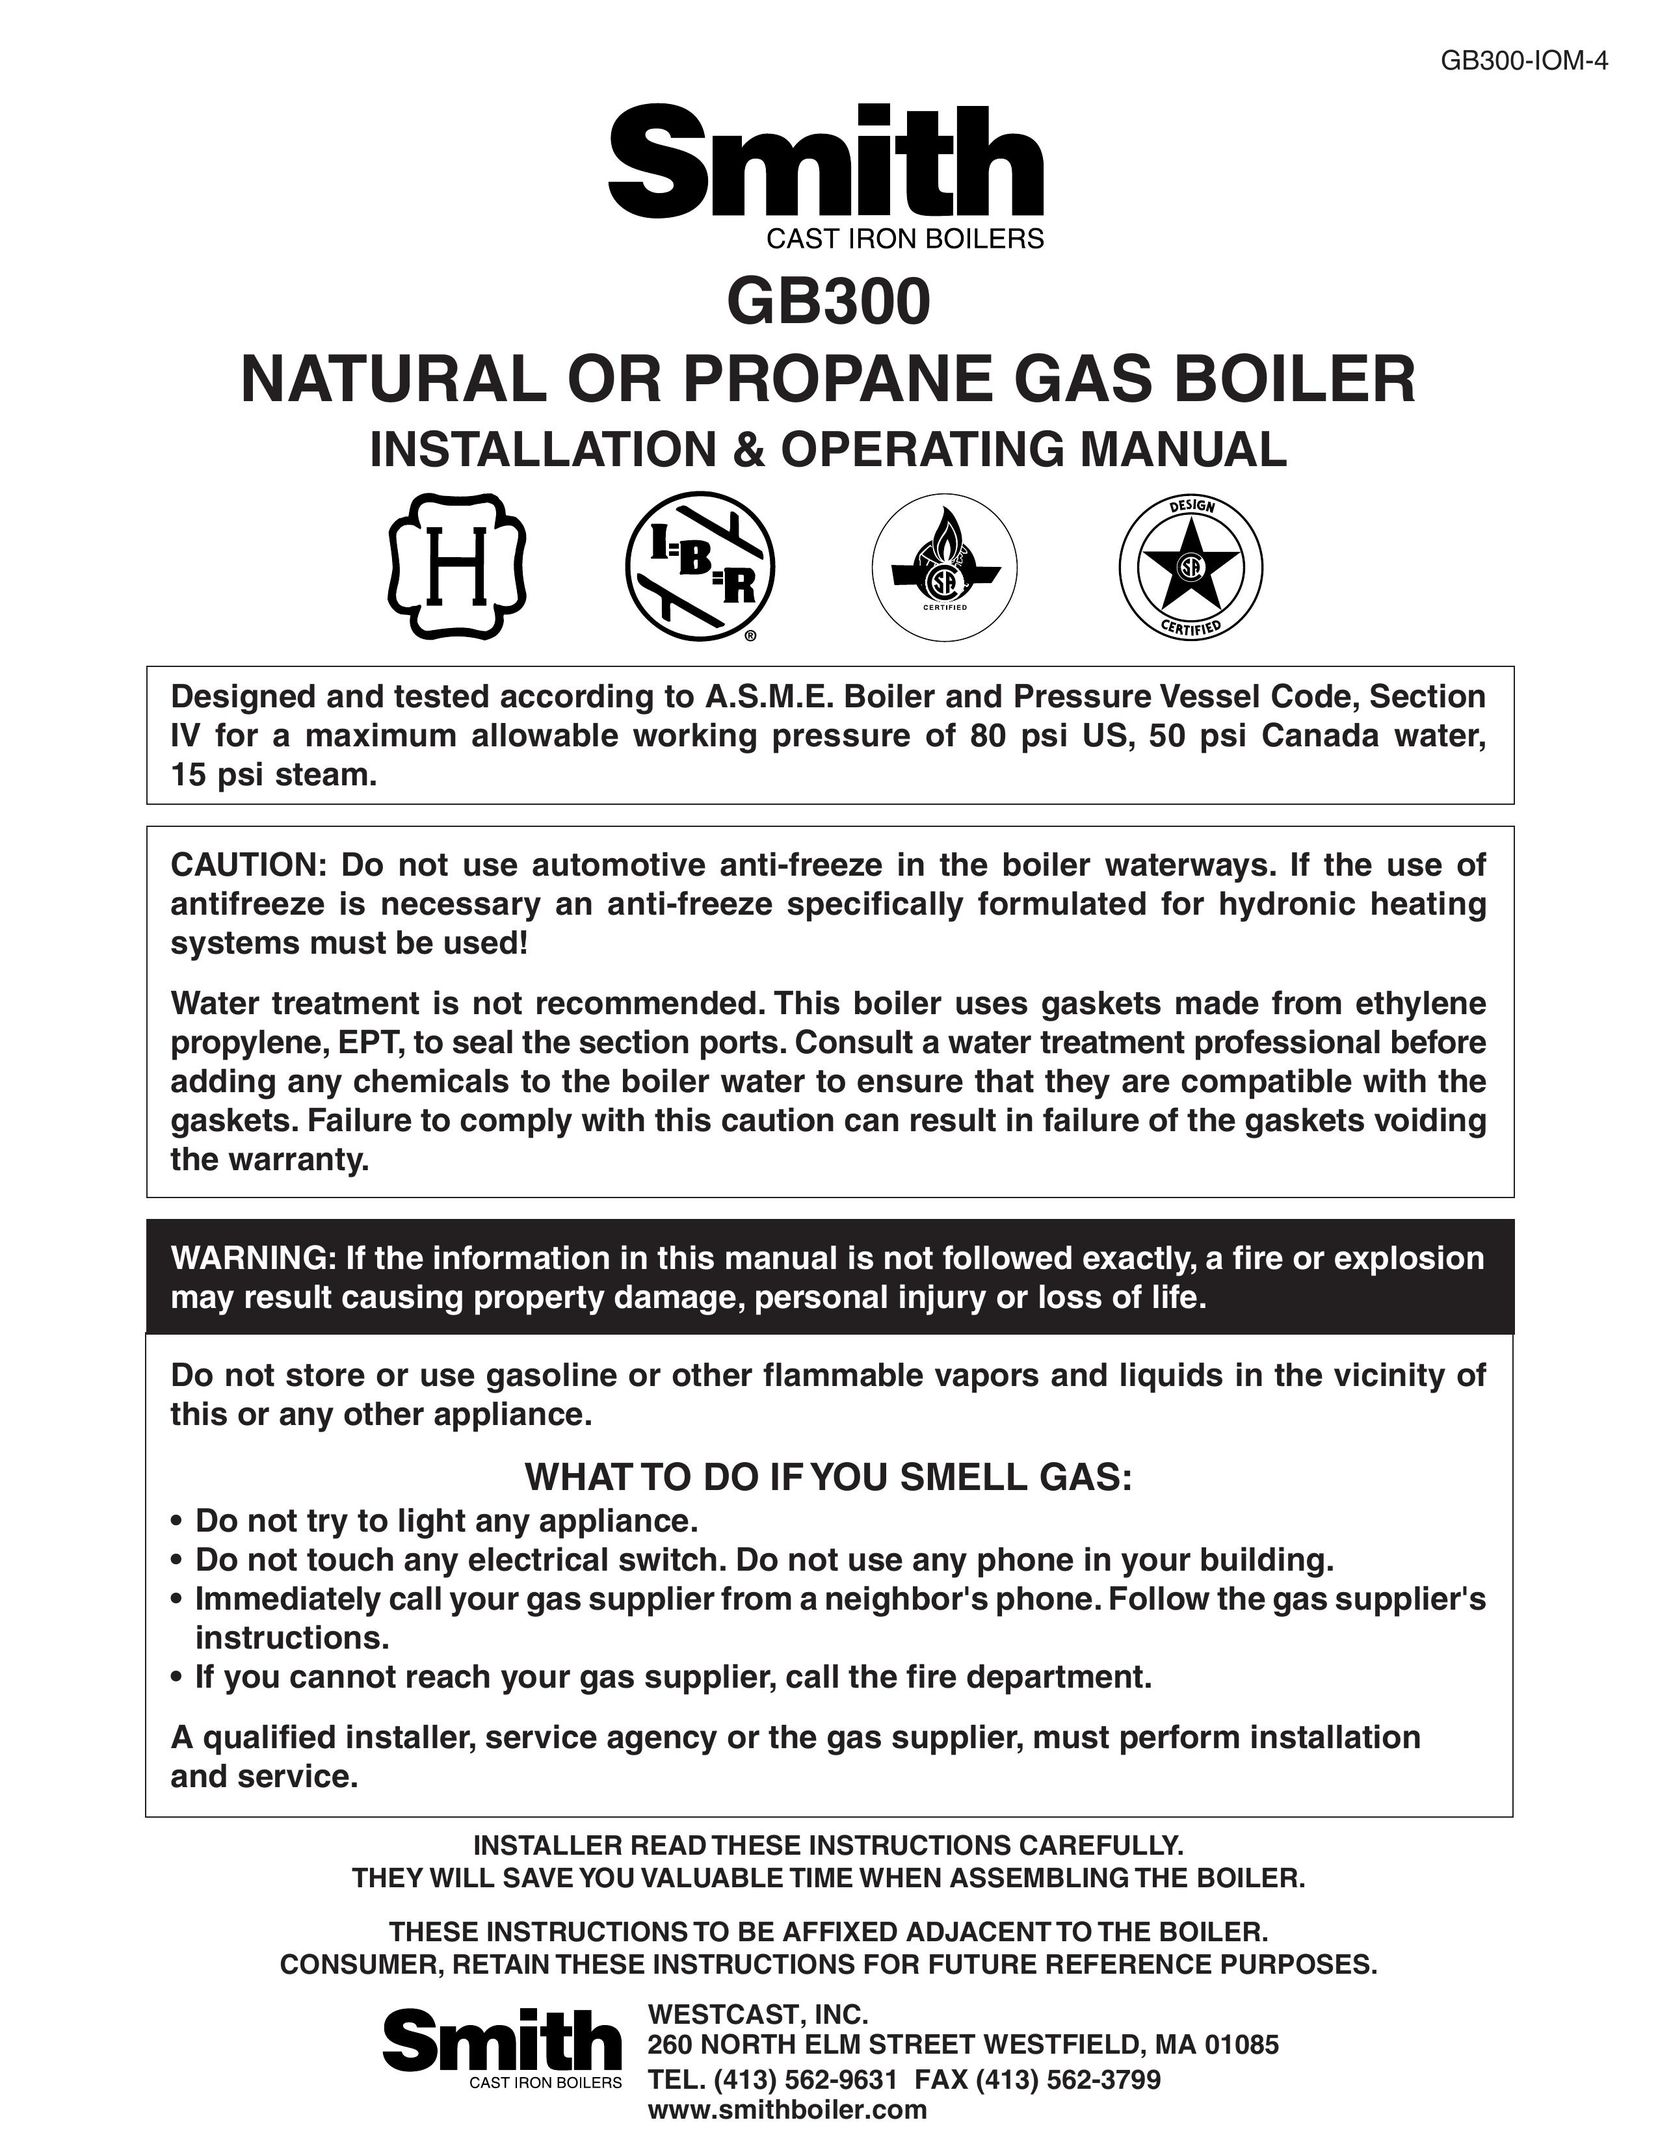 Smith Cast Iron Boilers GB300 Boiler User Manual